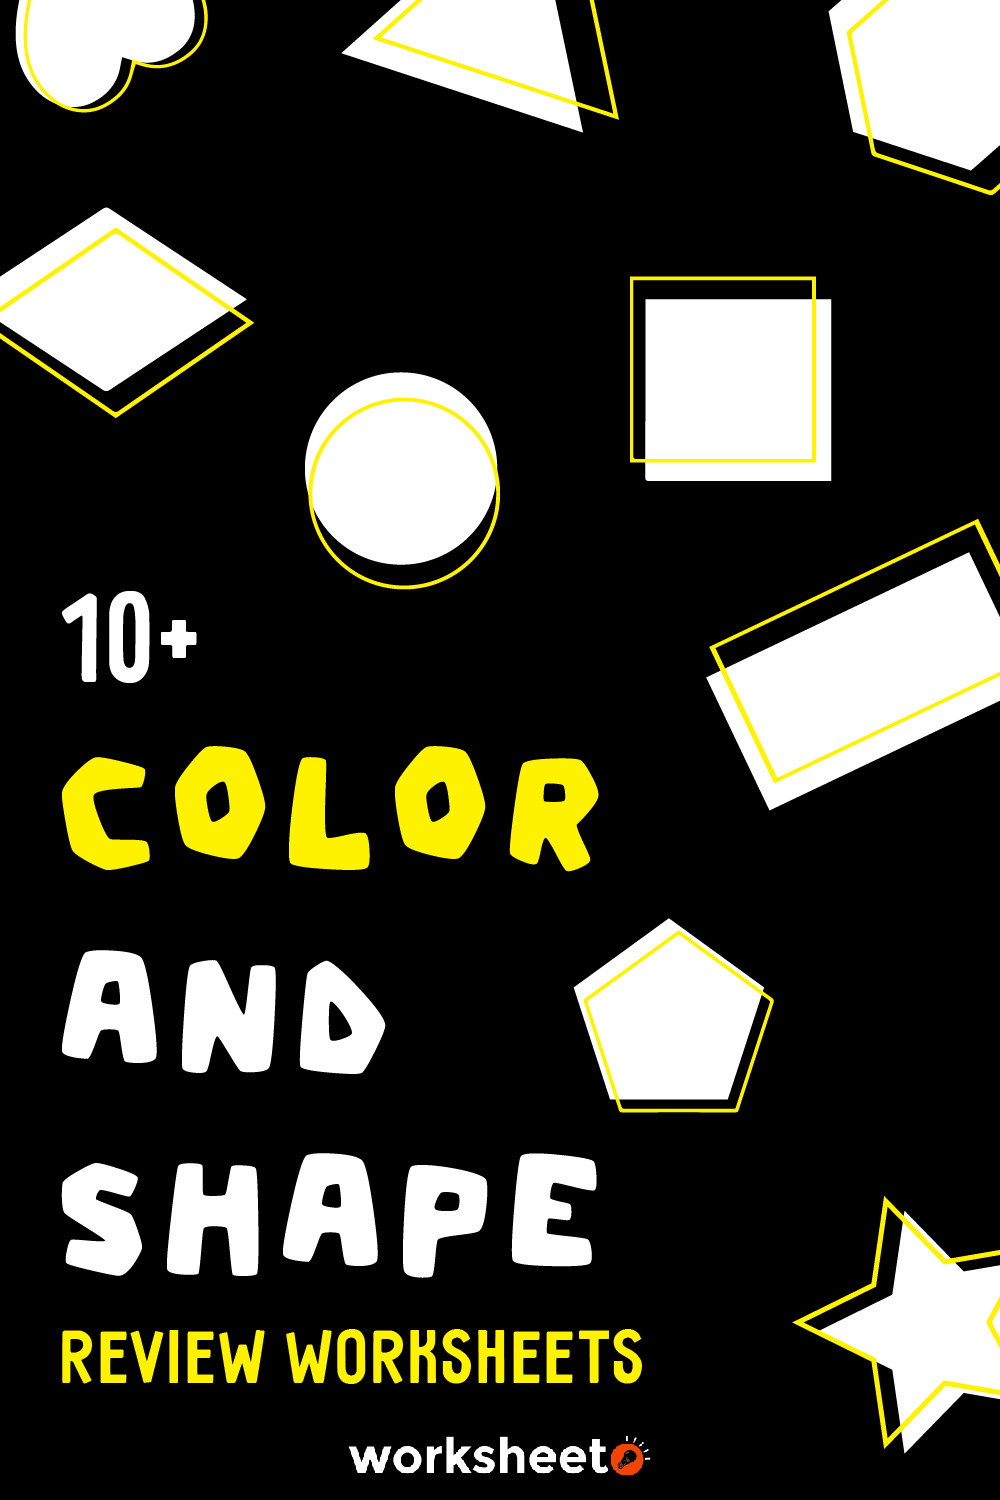 13 Images of Color And Shape Review Worksheets